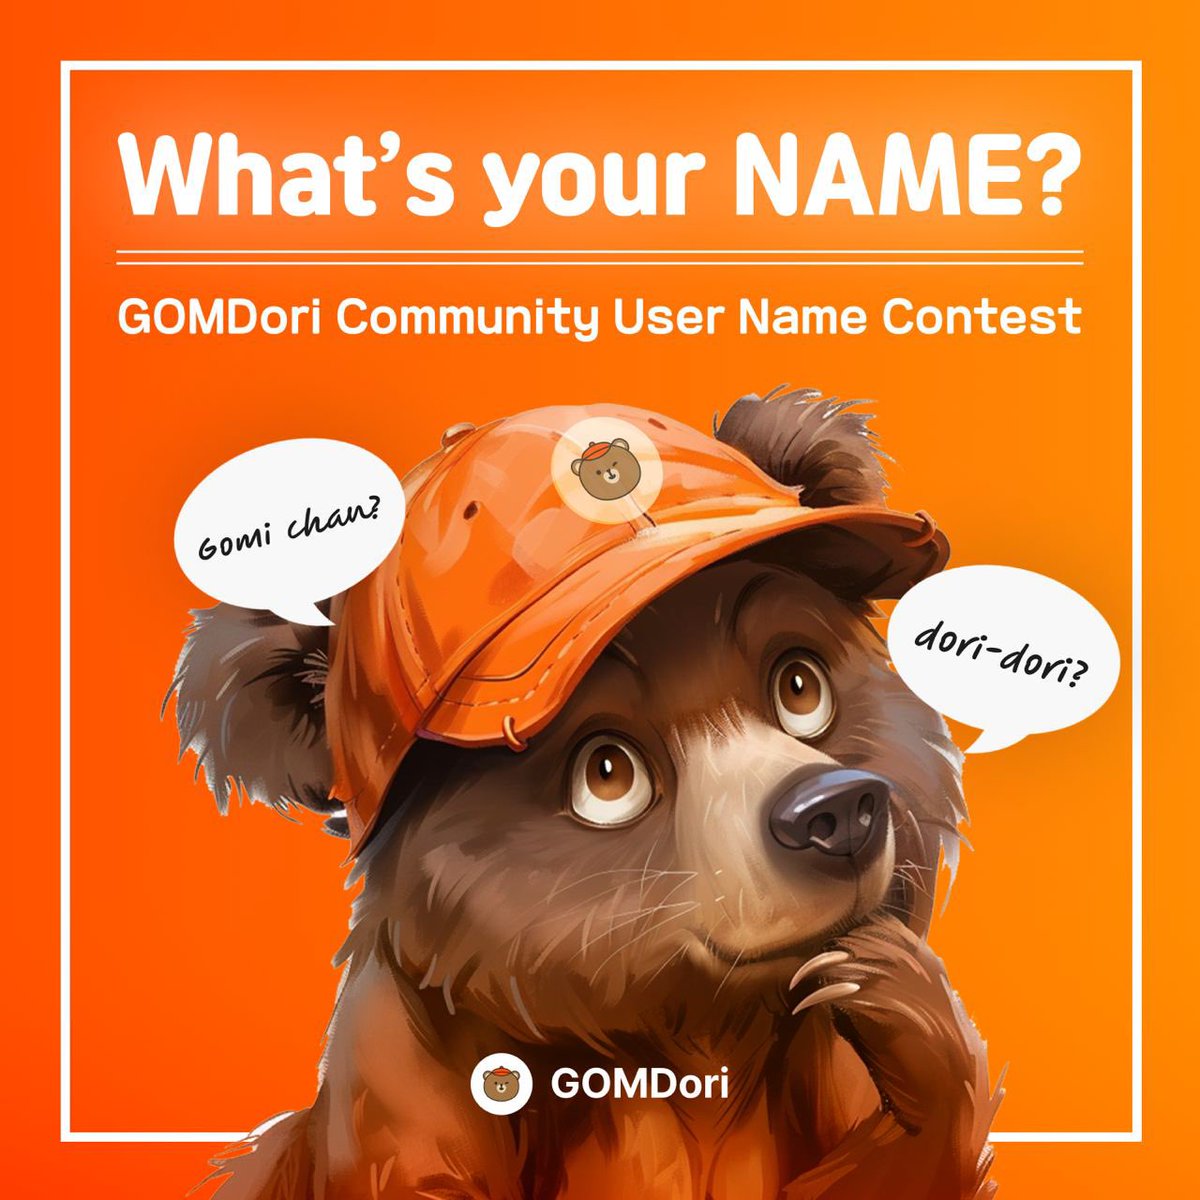 Exciting news! A new quest airdrop campaign is now live on zealy.io! 🎉 Submit your creative ideas to help decide the Gomdori community user name (e.g. $SHIB -> Shibizen, Shibarmy). Don't miss out! 1️⃣ Follow @Gomdori_GOMD 2️⃣ Like, retweet this post 3️⃣ Submit